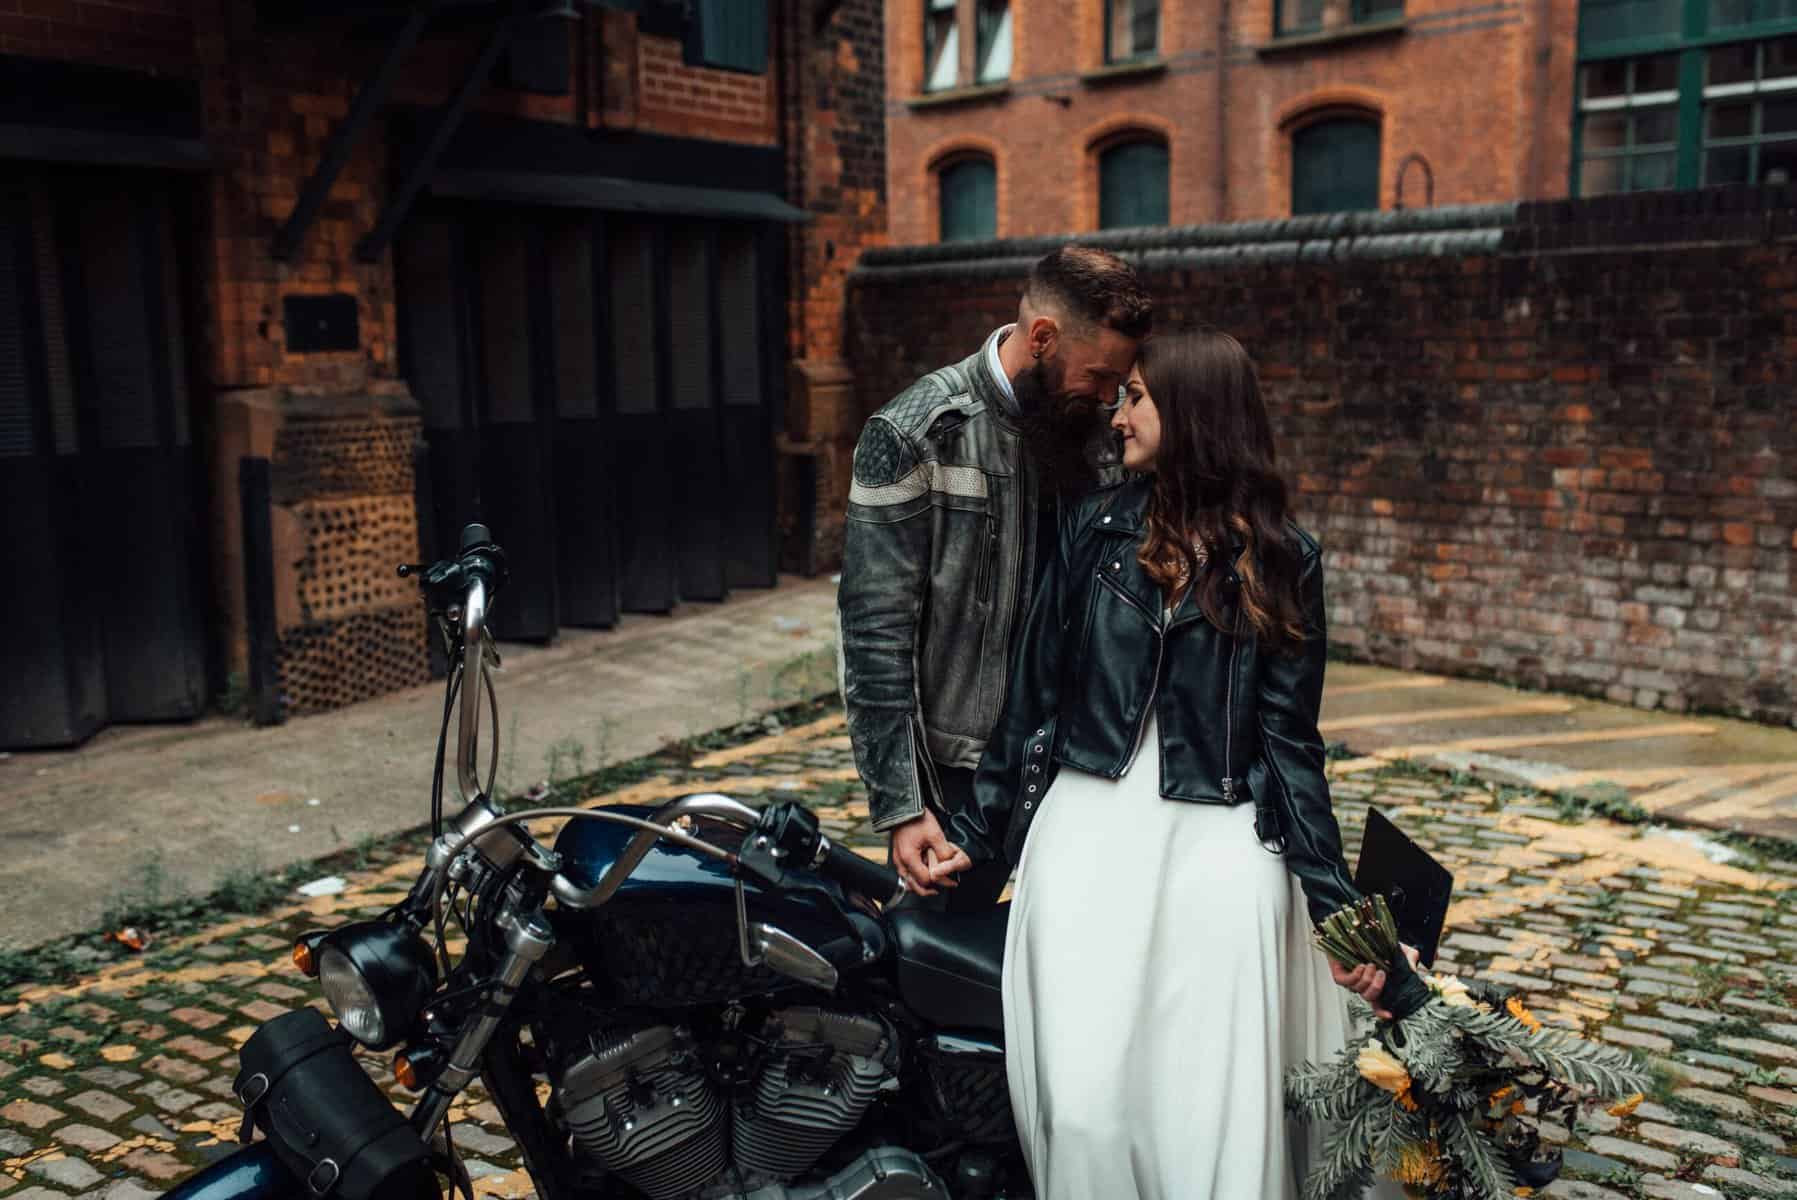 motor bike transport -Is an elopement right for you